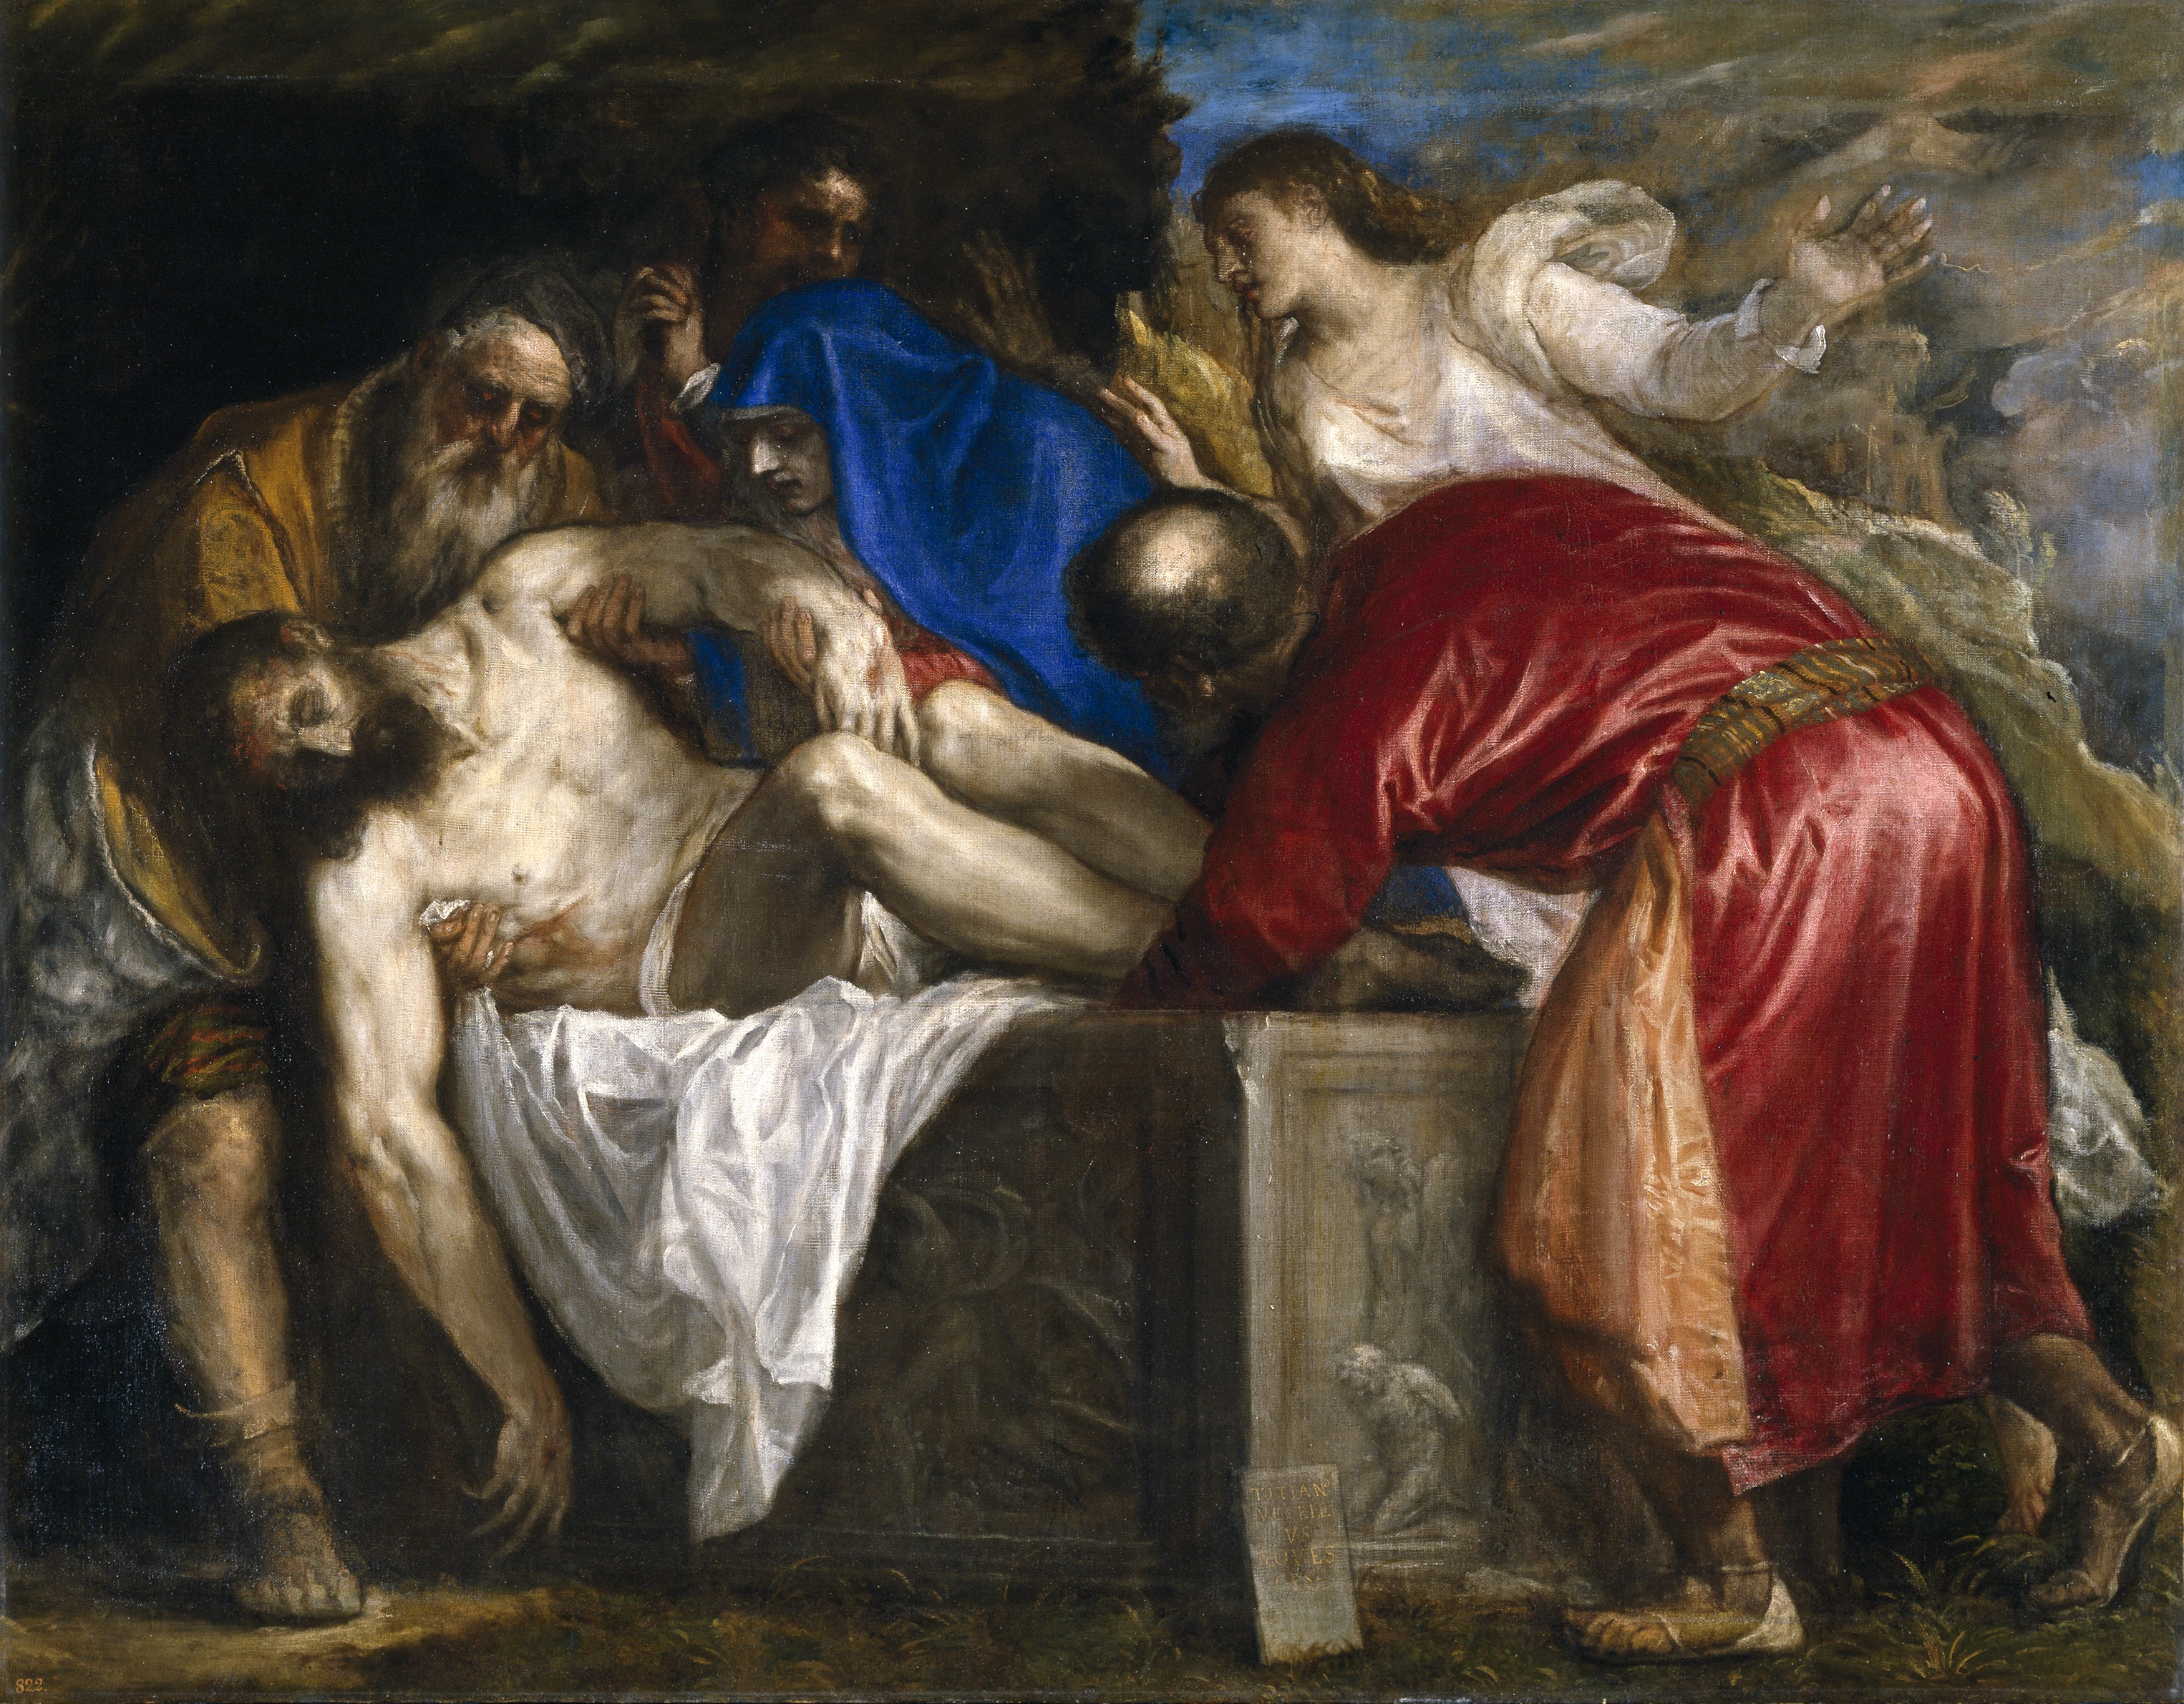 The Burial of Christ - 1559, Titian